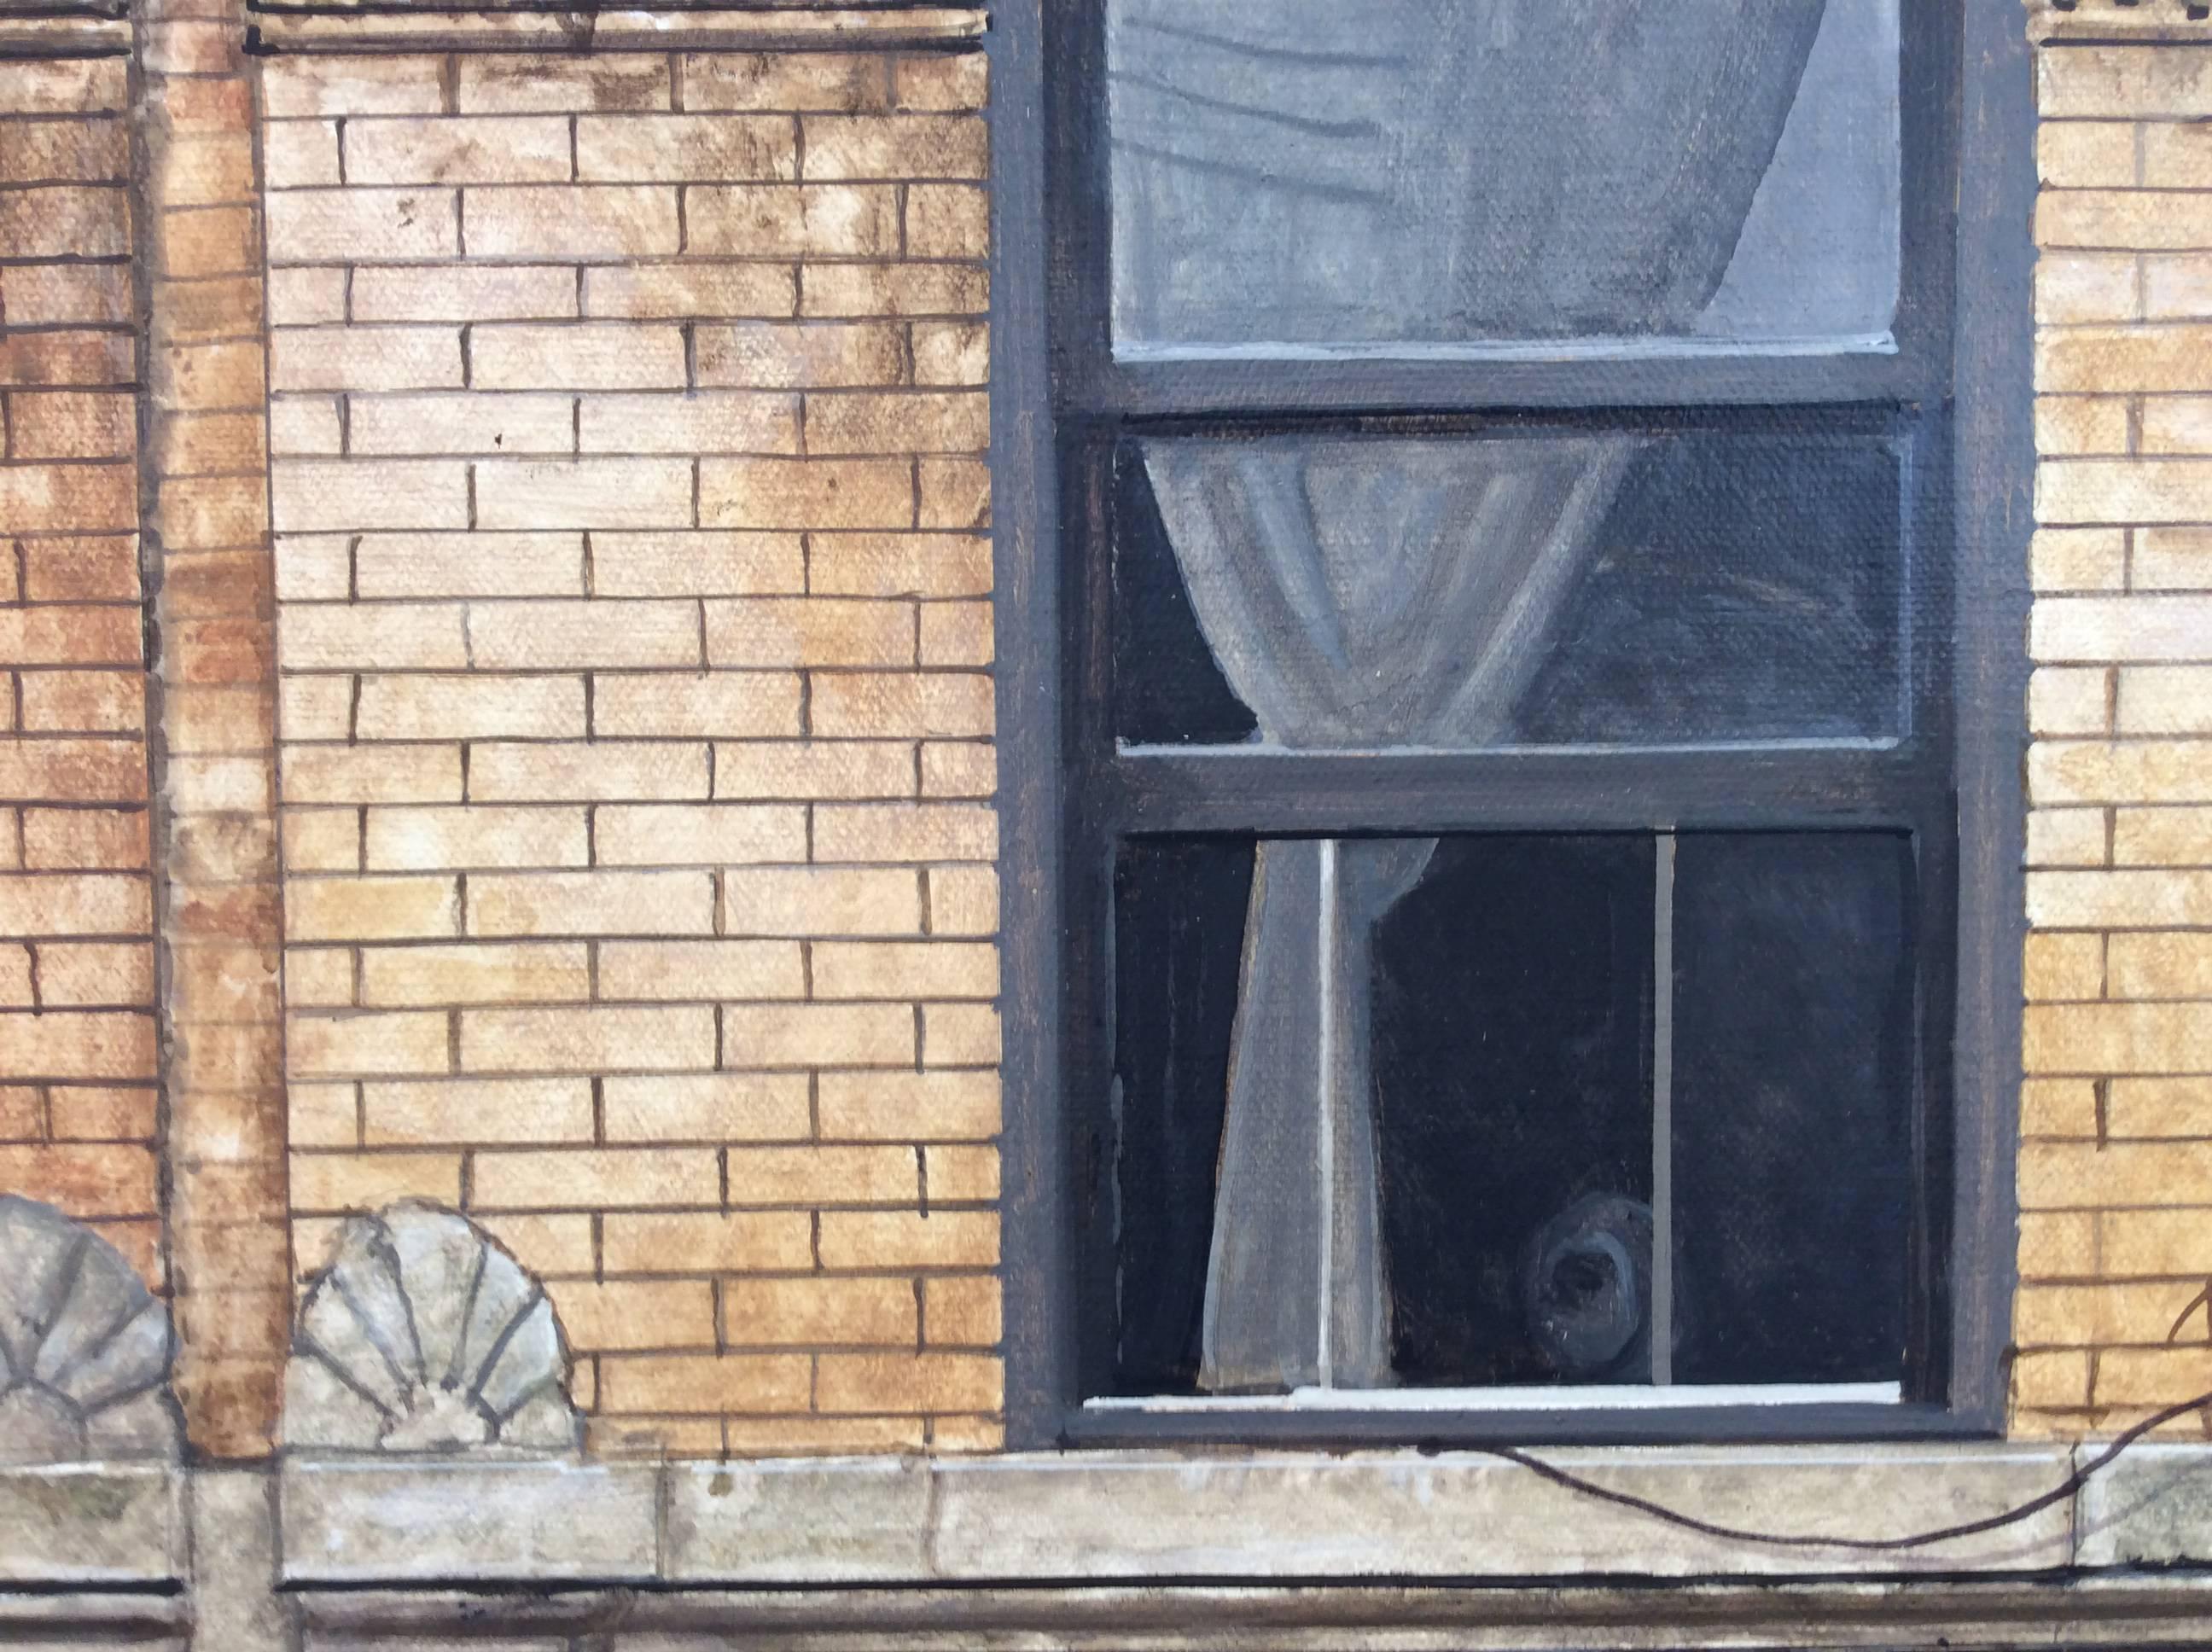 Six Windows 98 St Marks Place: Photo Realist Oil Painting of NYC Brick Building 2